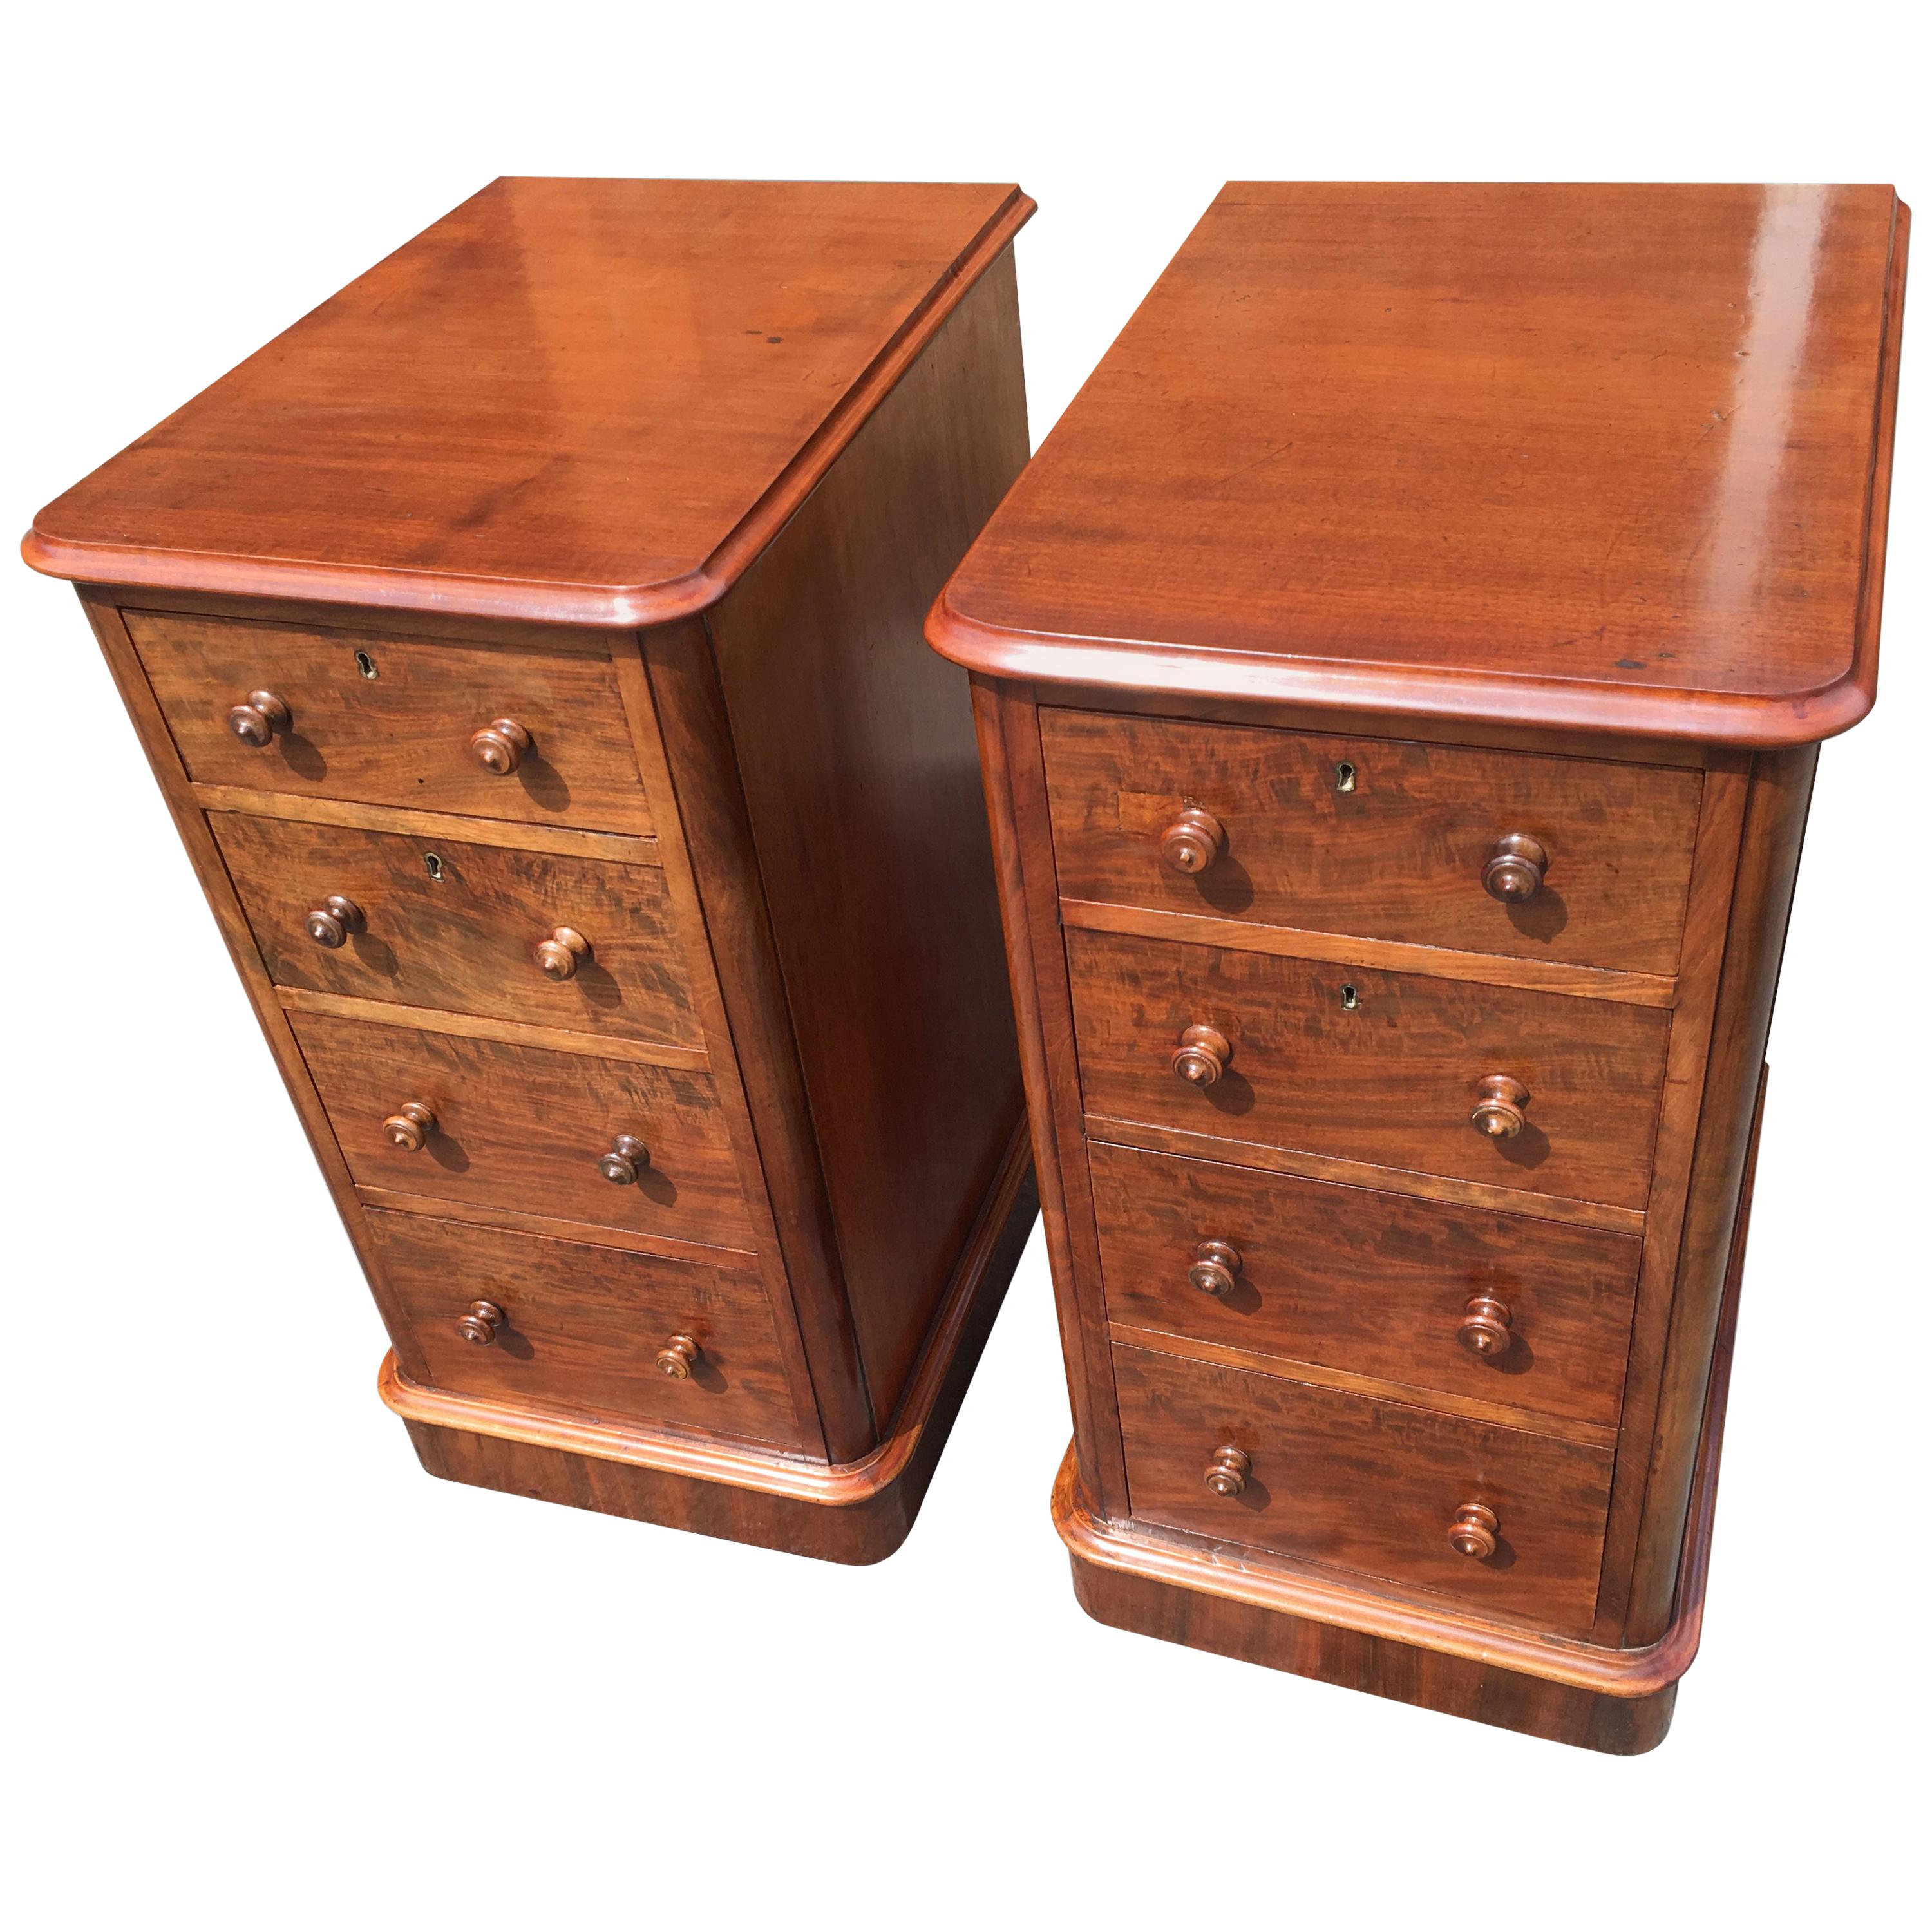 Pair of Mahogany Bedside Cabinets or Chests